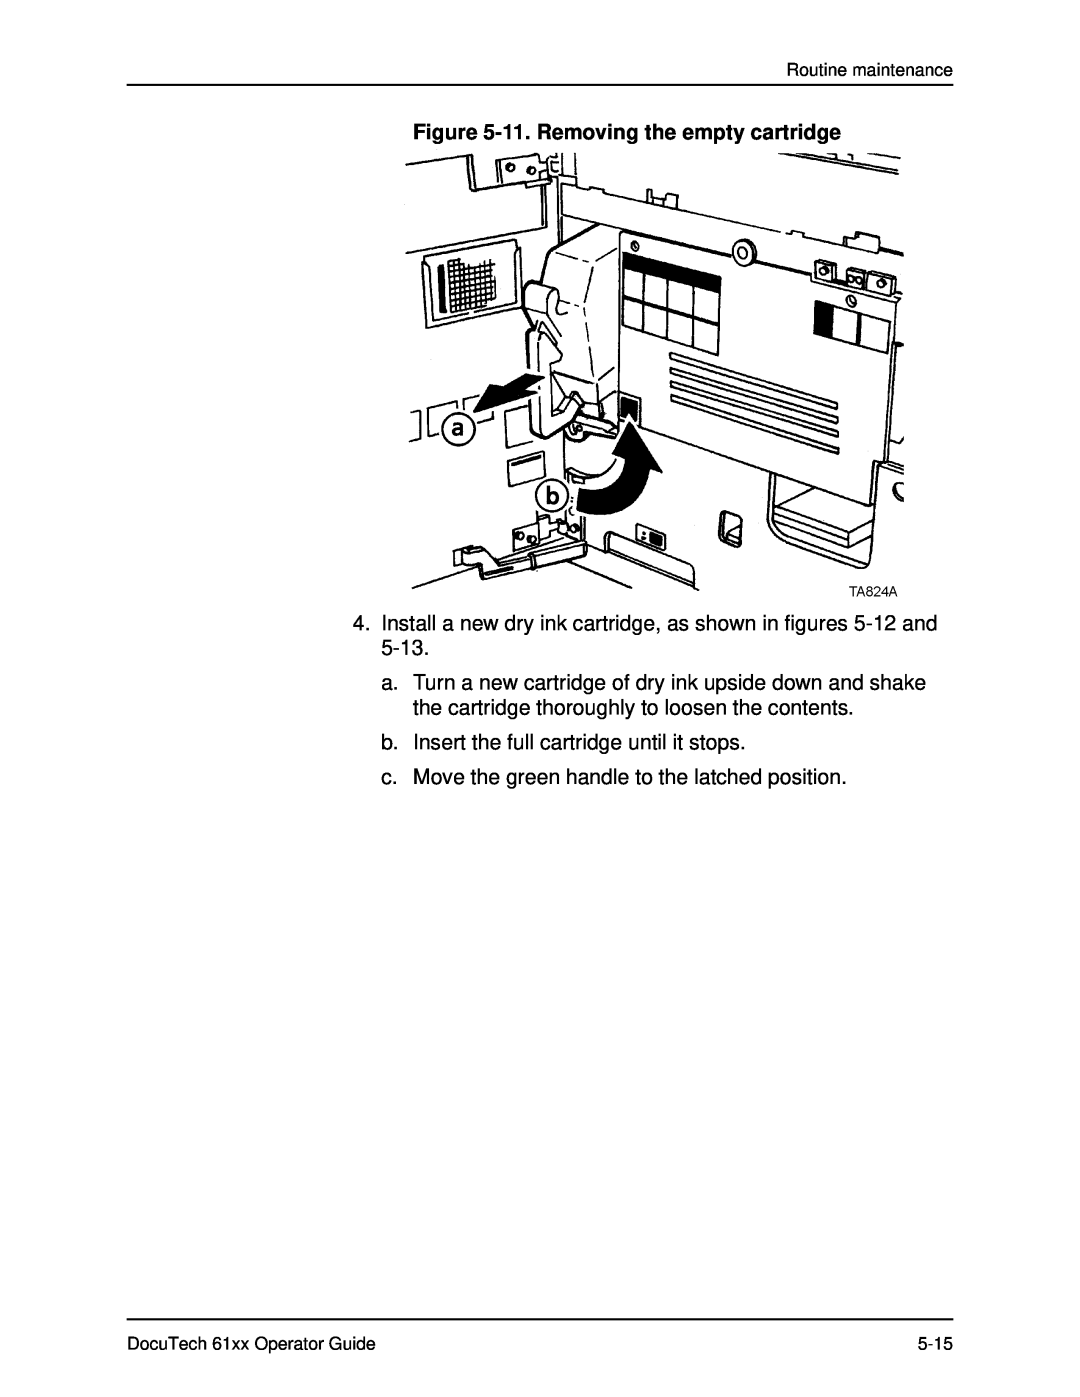 Xerox 61xx manual 11. Removing the empty cartridge, Install a new dry ink cartridge, as shown in figures 5-12 and 